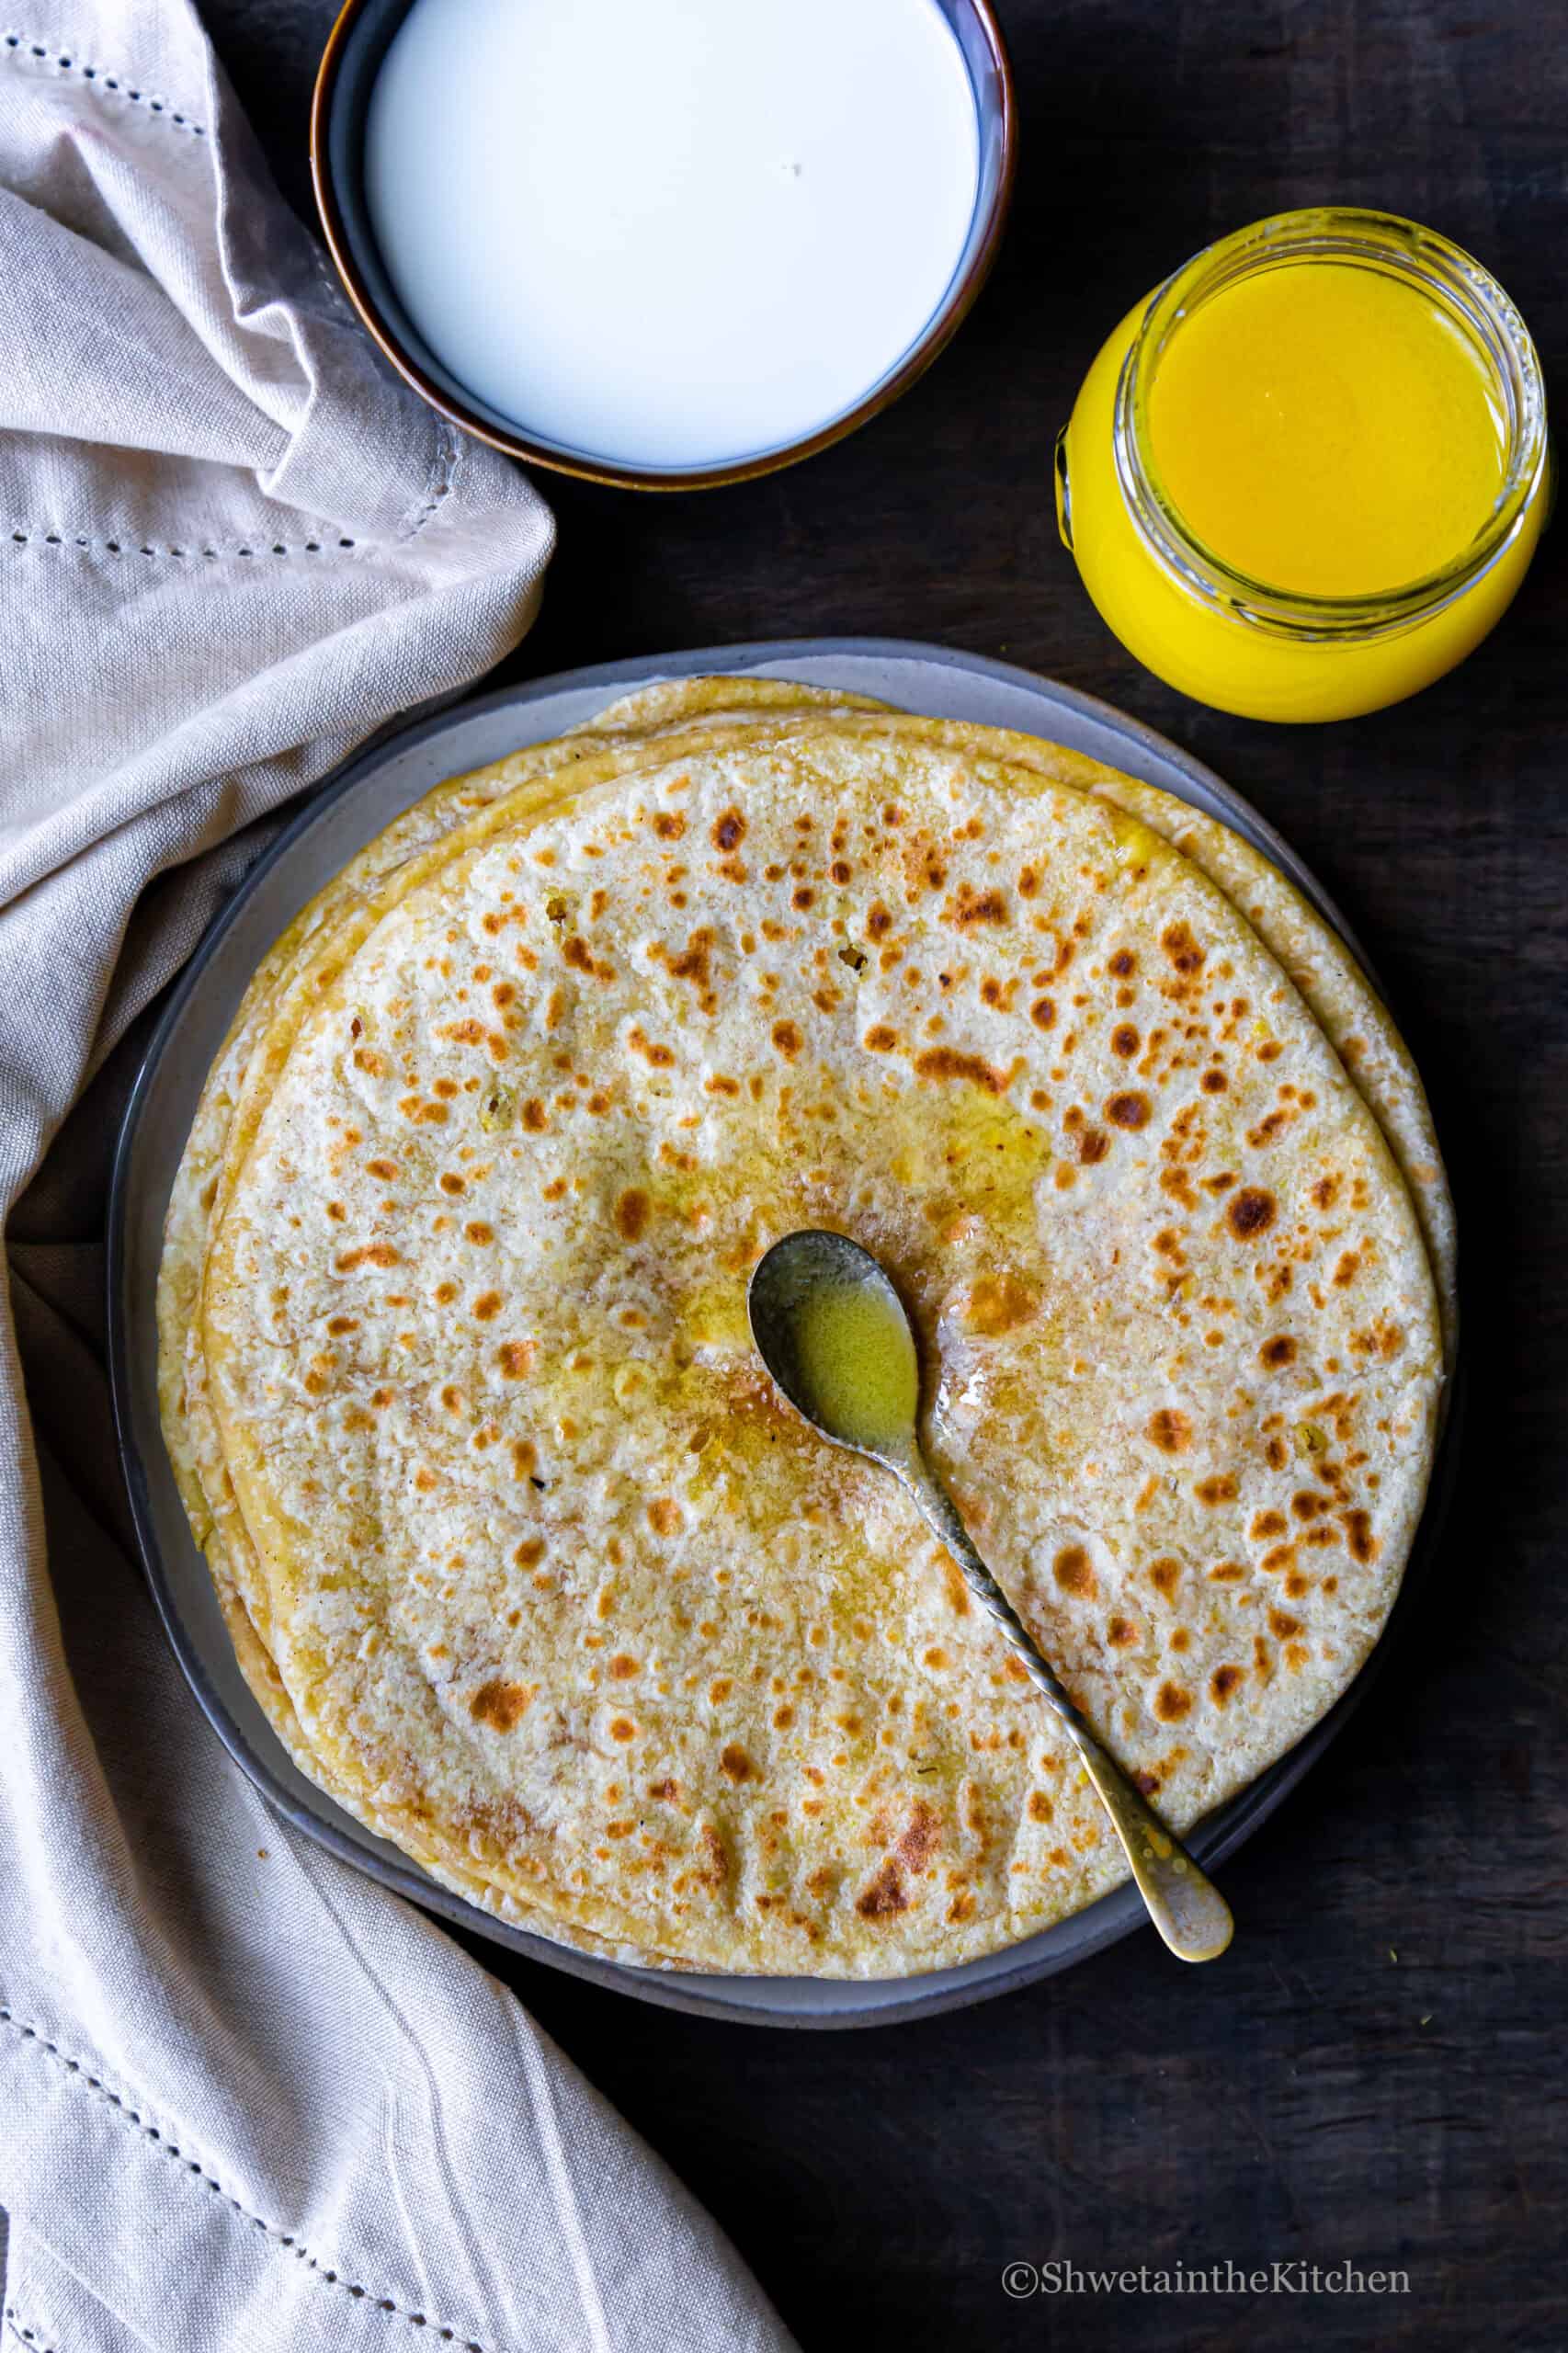 Top view of Puran Poli placed on a plate with ghee and milk on side